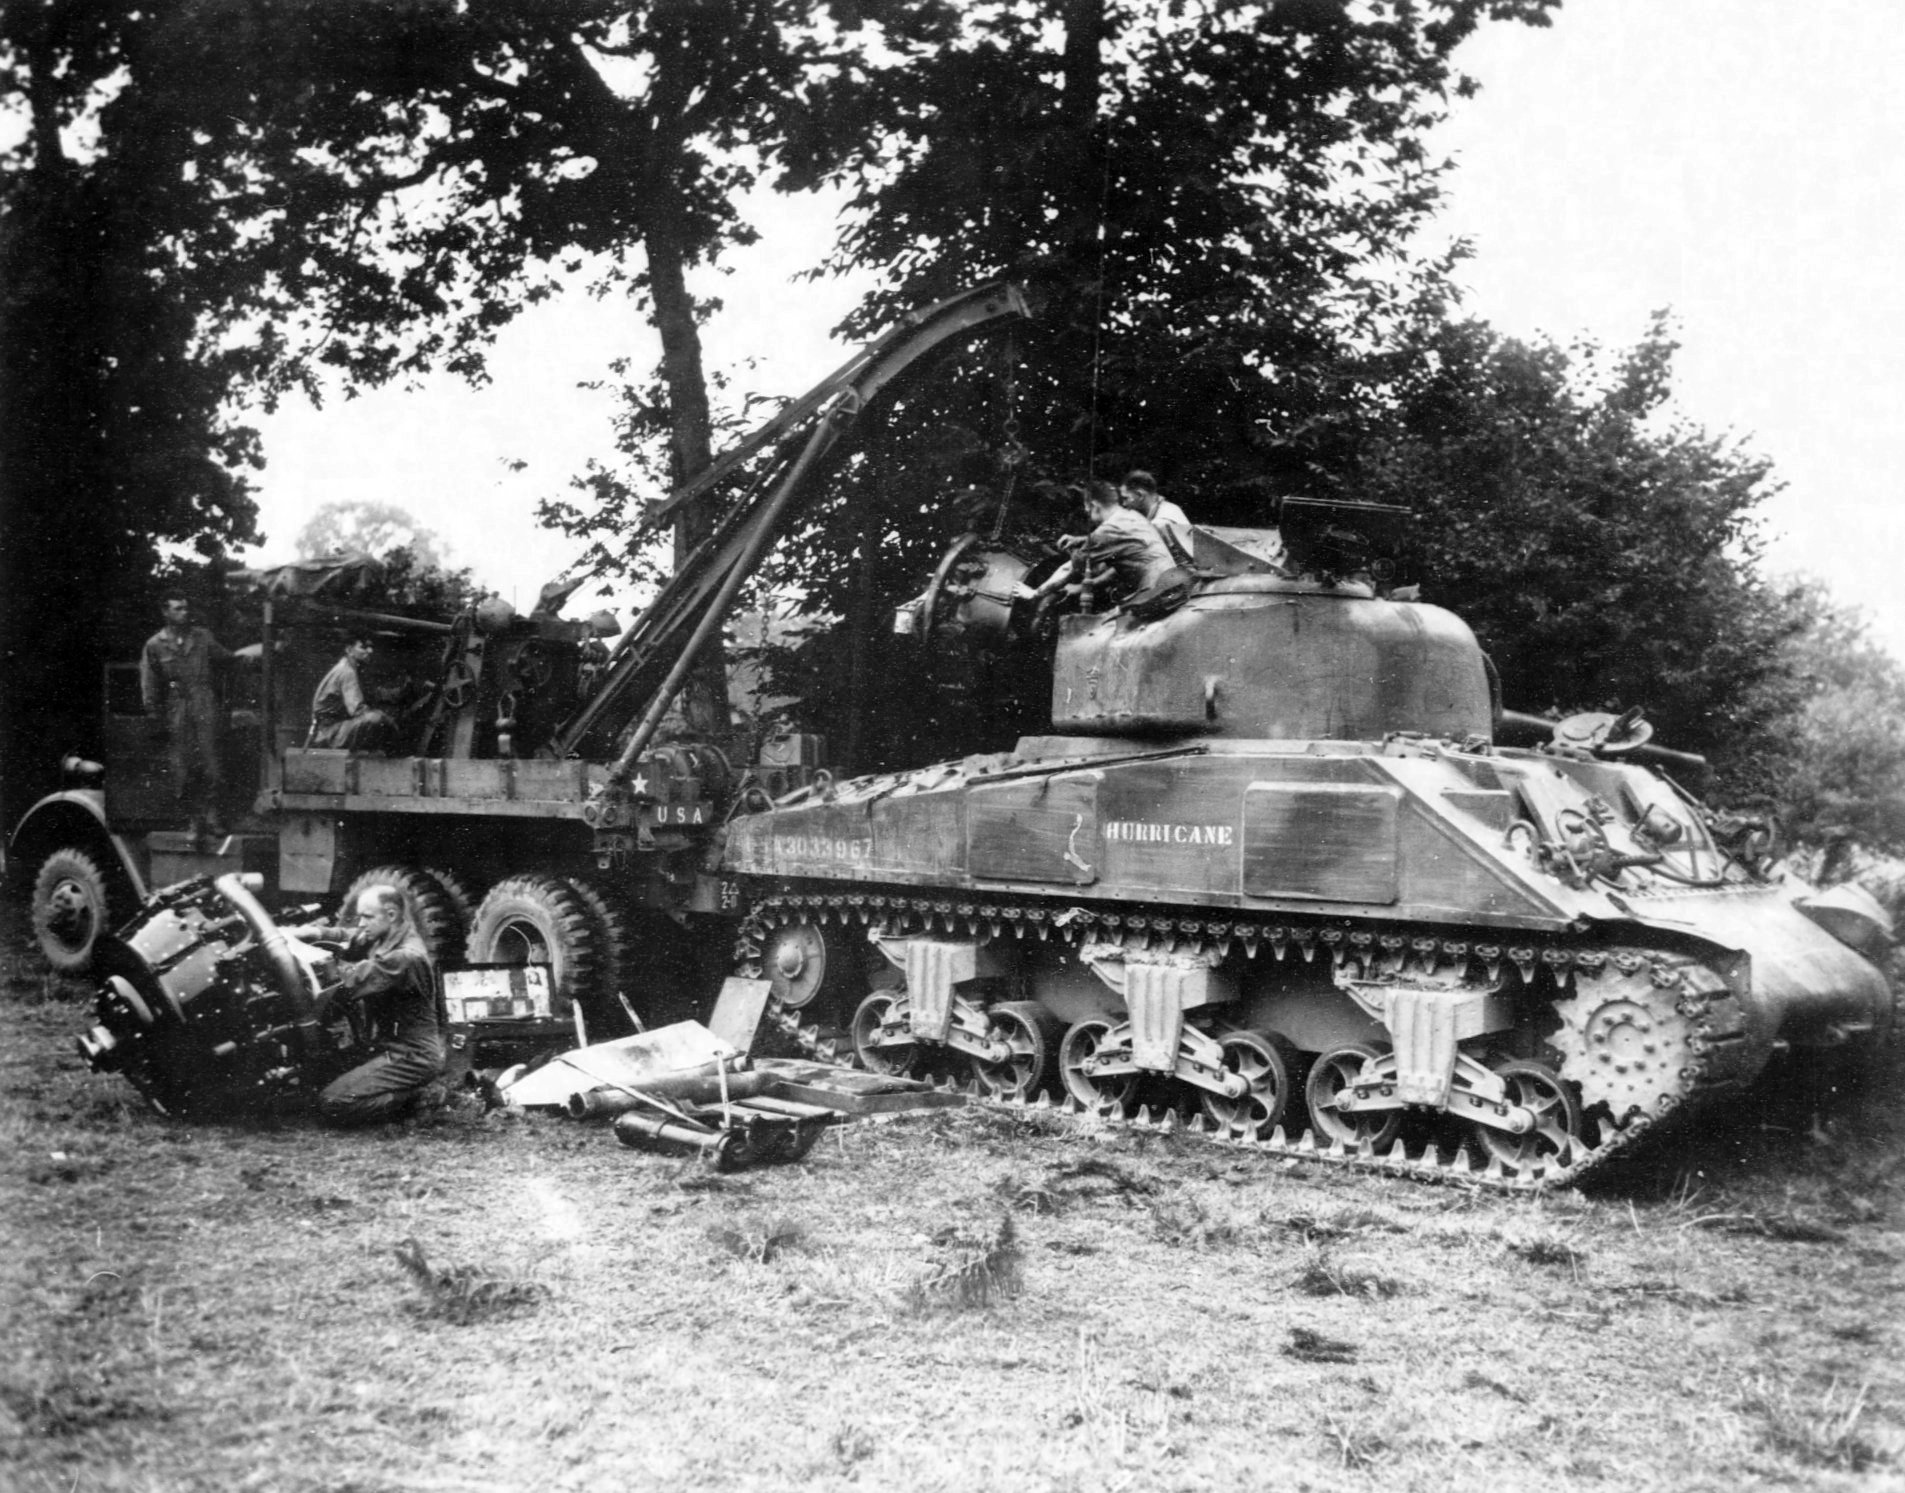 Engine change for M4 Sherman tank “Hurricane” at a repair depot near the front lines, Le Teilleul, France, July 1944. Note Federal C-2 Wrecker